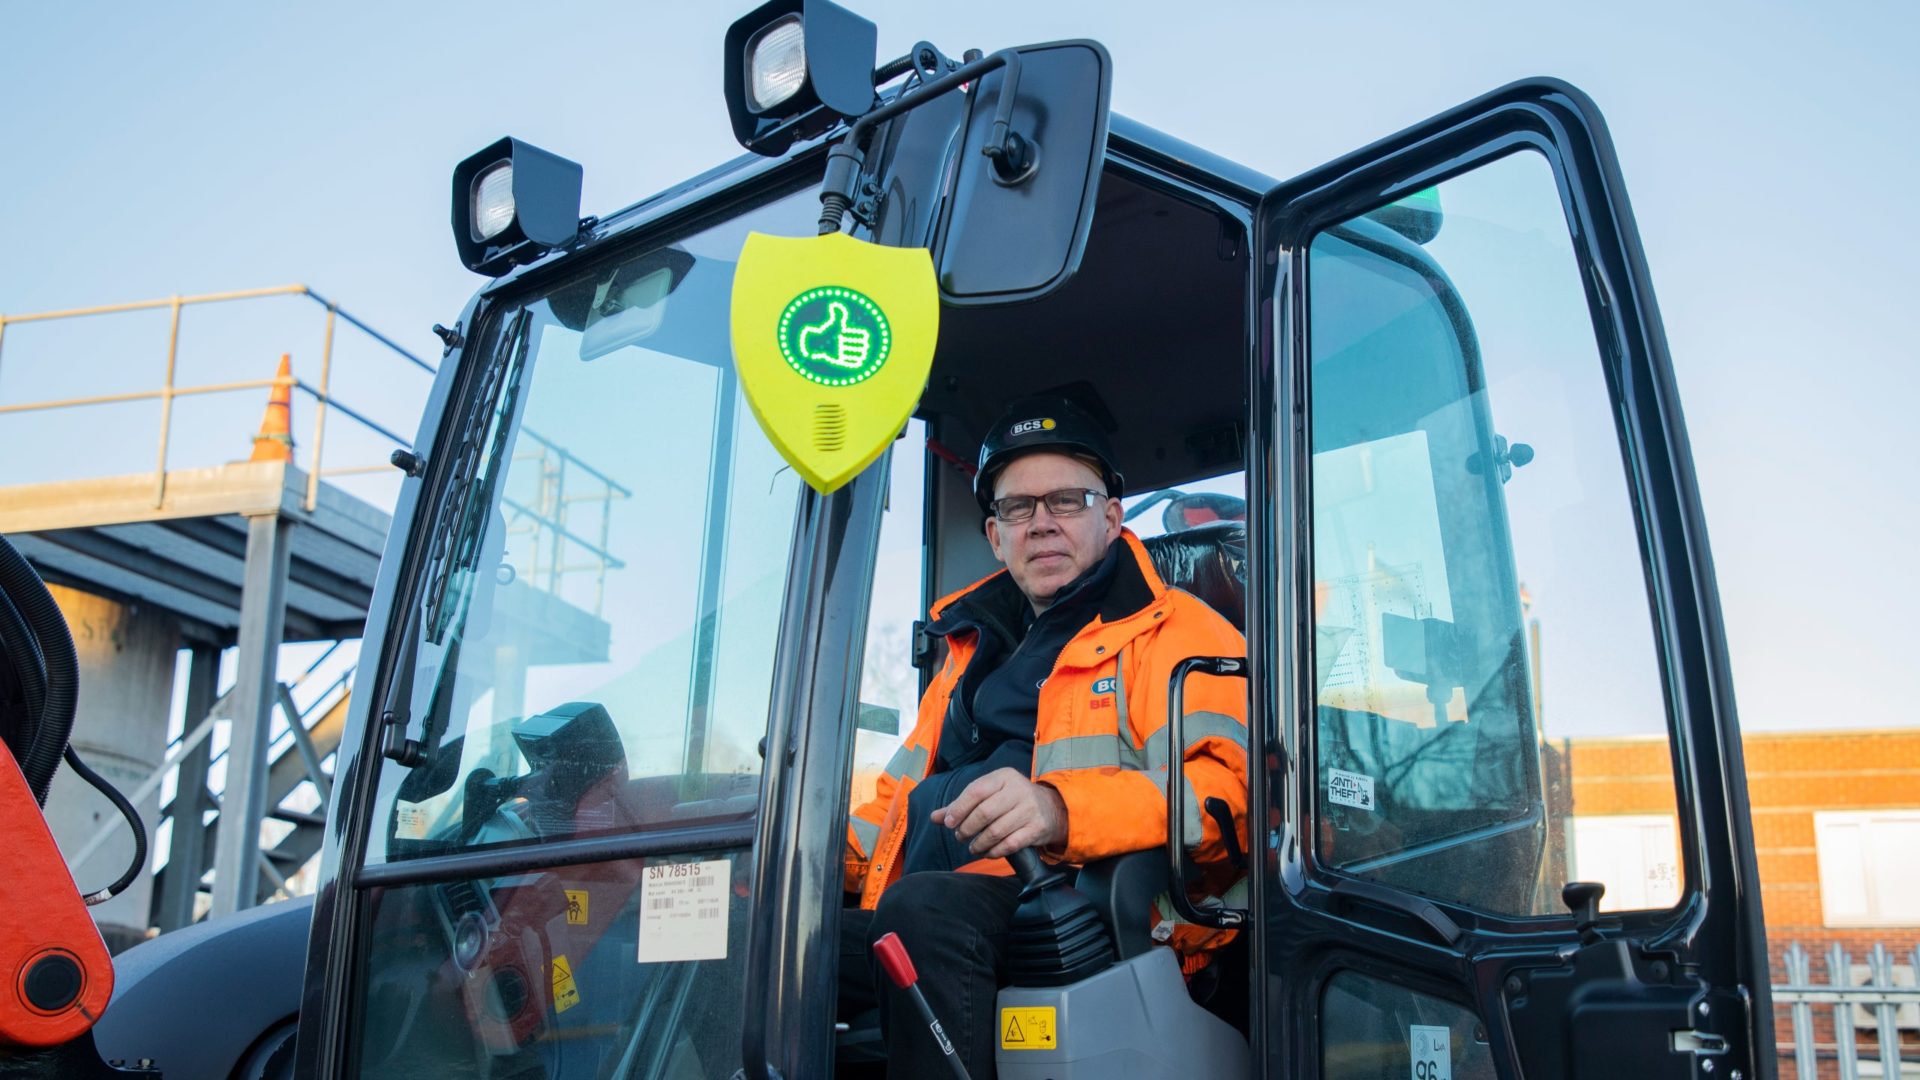 A man in an excavator with an orange high-vis jacket. The excavator has a shield outside with a LED thumbs up.